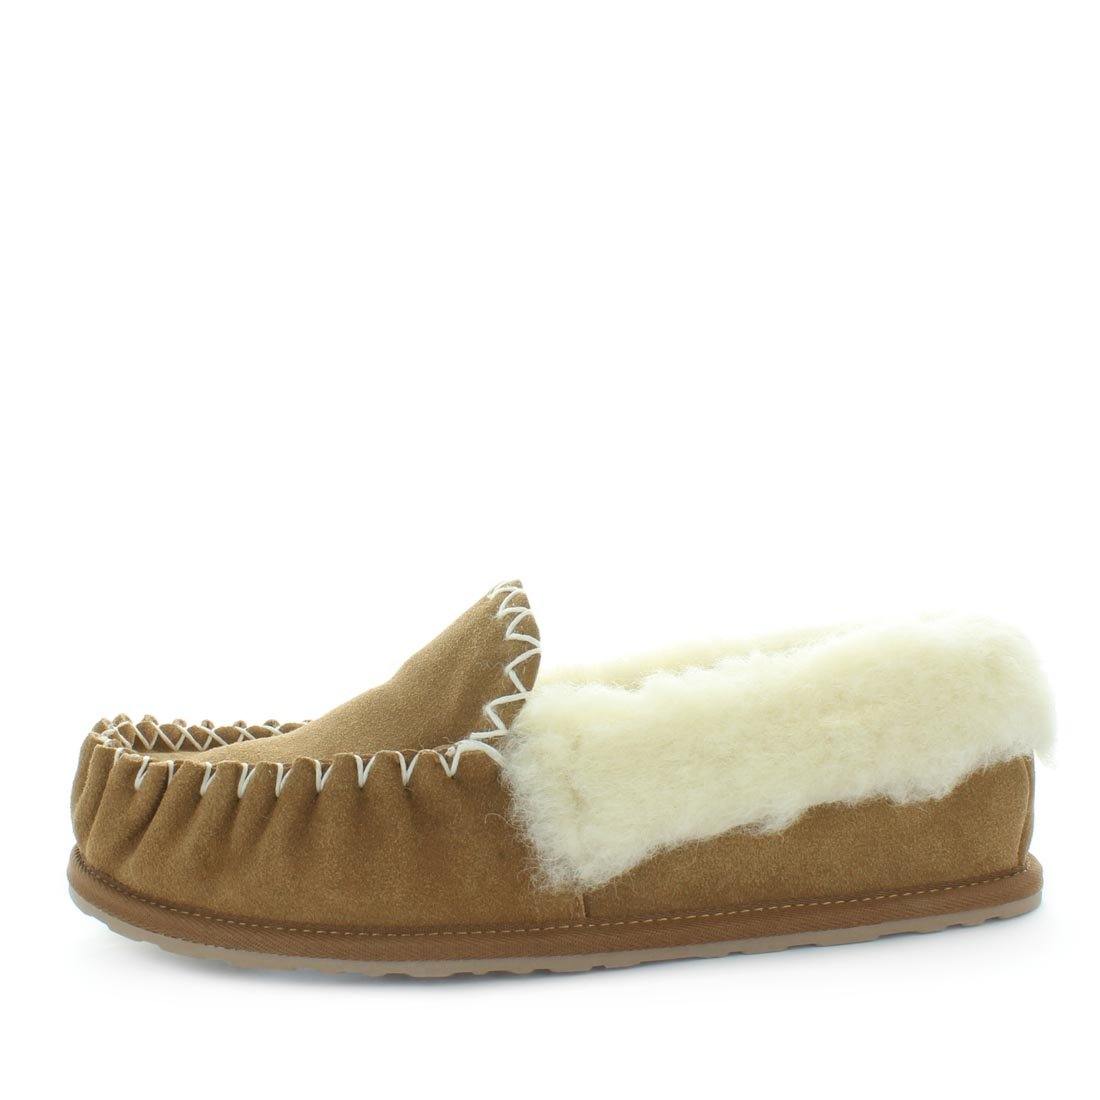 CHUMS (6535825915983)Mens slipper chums by just bee uggs, uggs boots - just bee slippers - mens slippers, moccasin slippers, wool slippers, 100% wool slippers. 